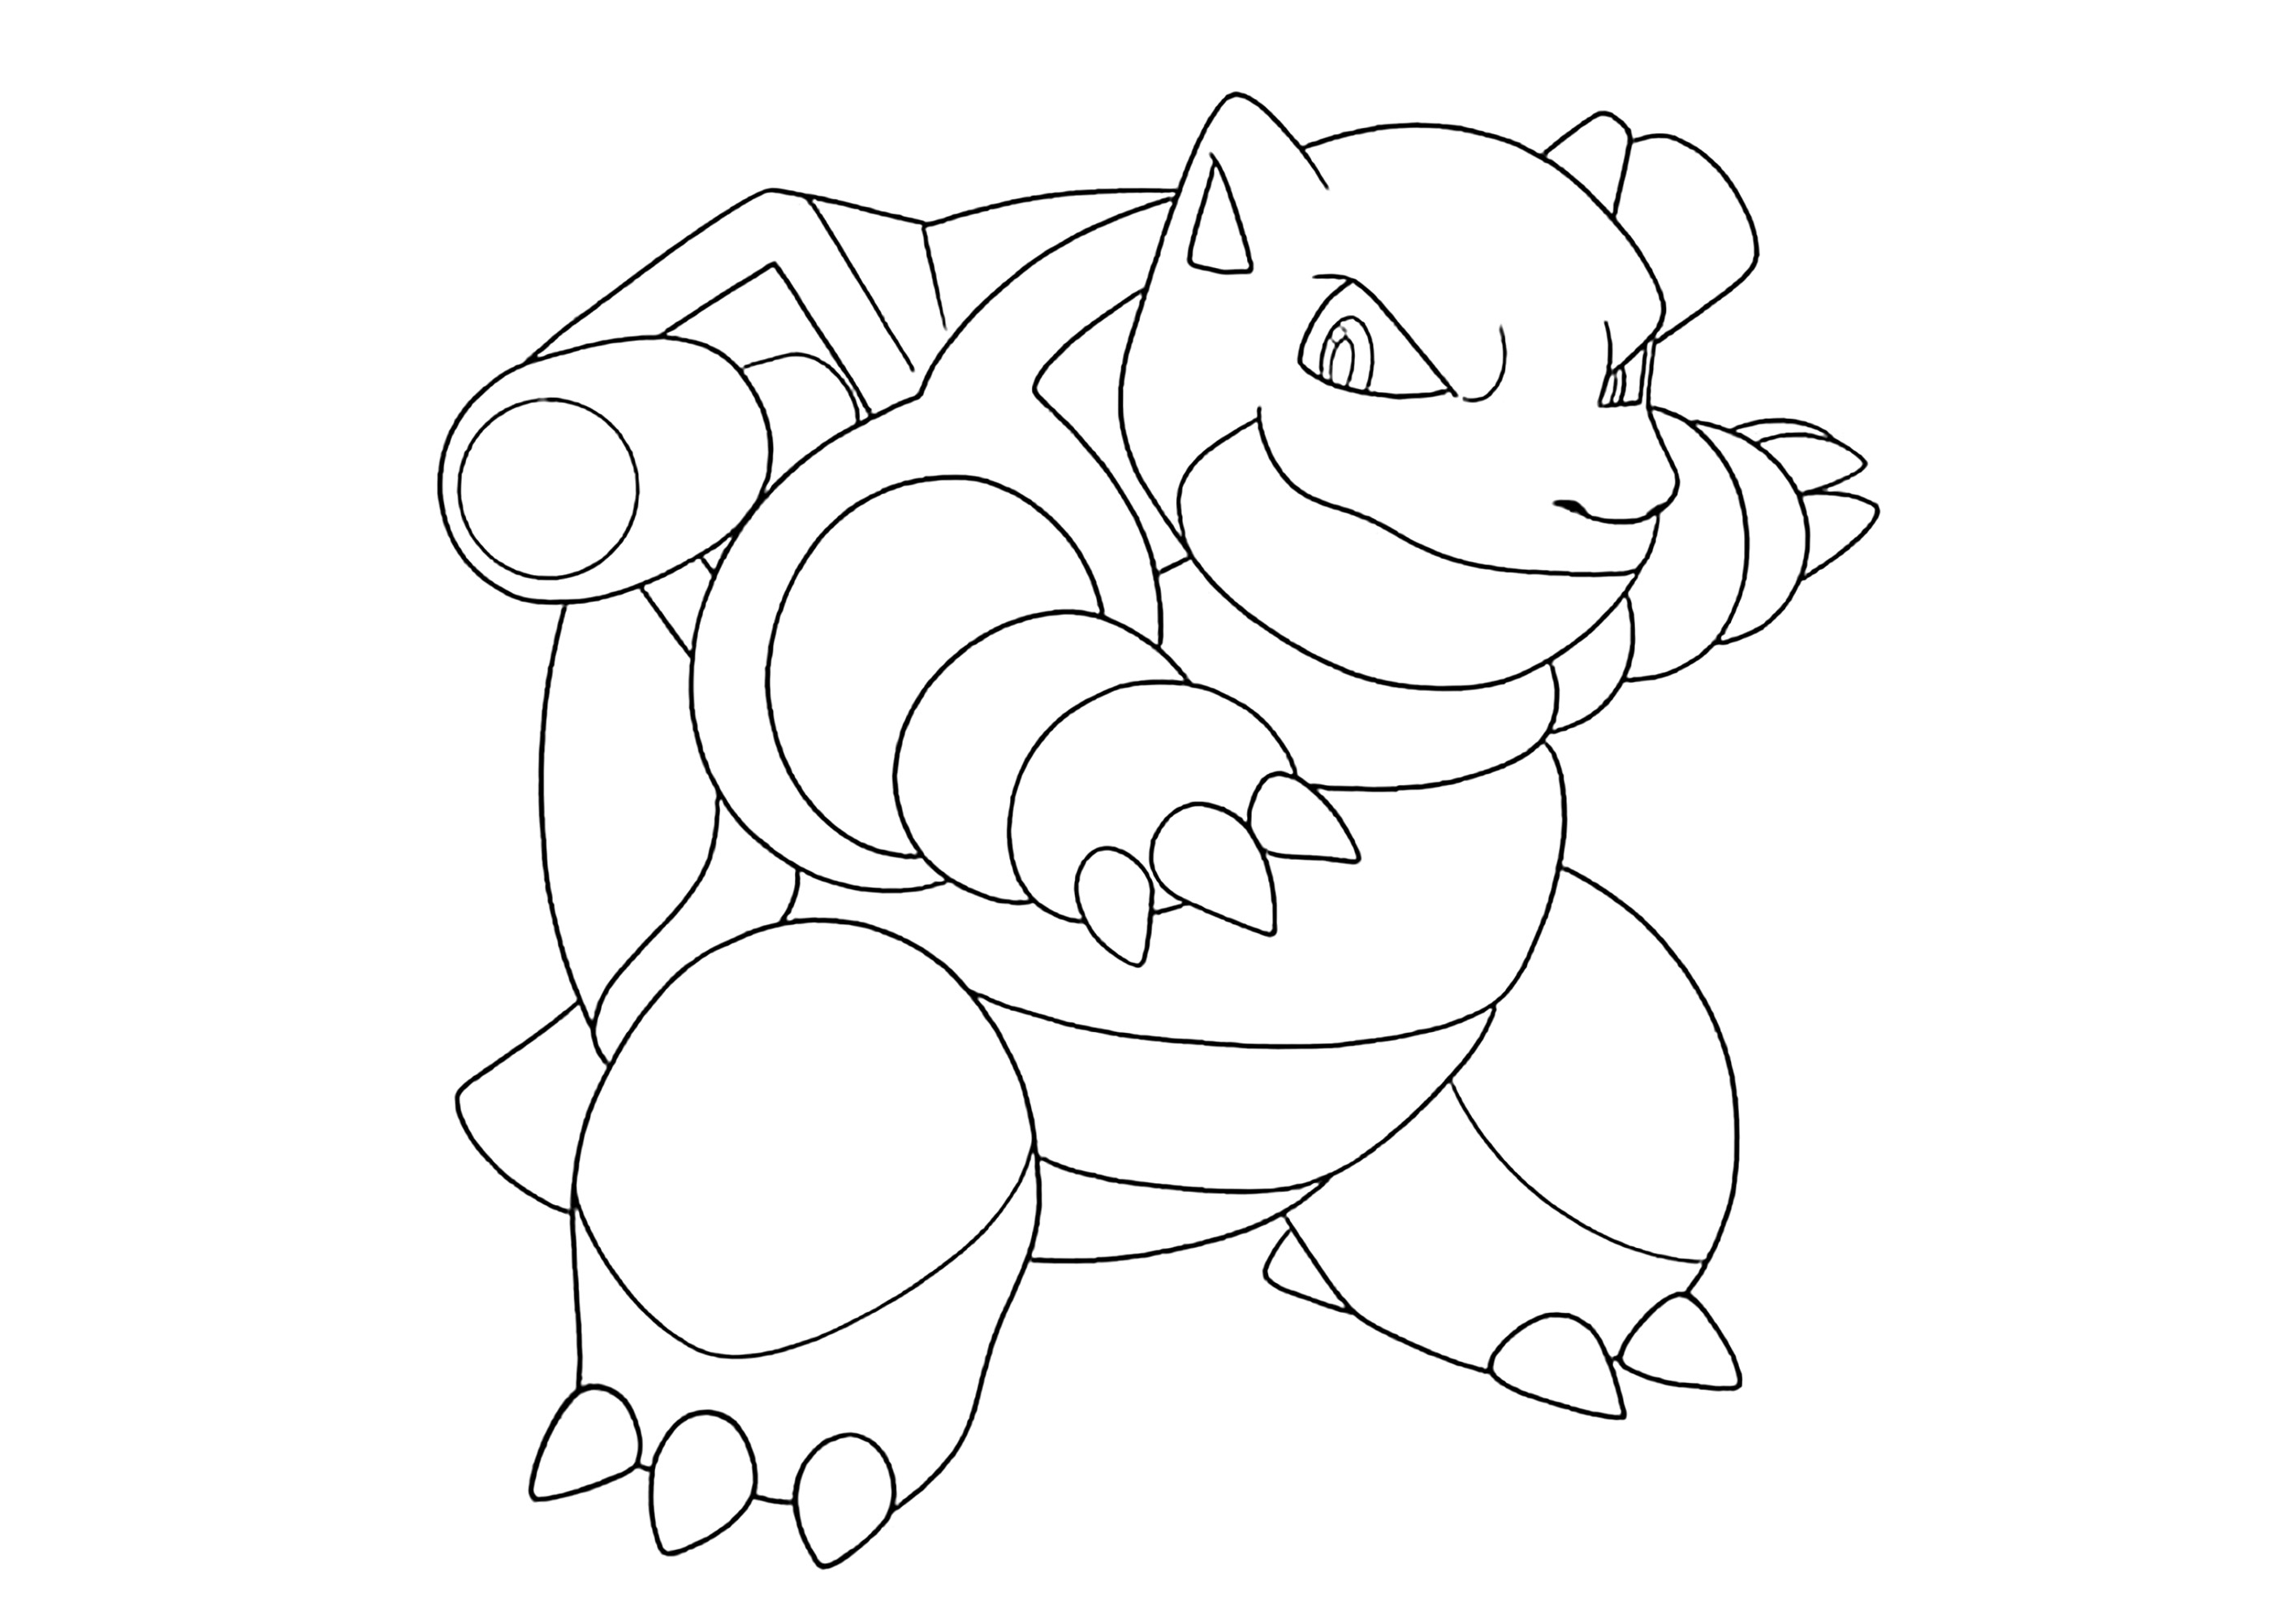 Blastoise : Easy coloring page - All Pokemon coloring pages Kids ...